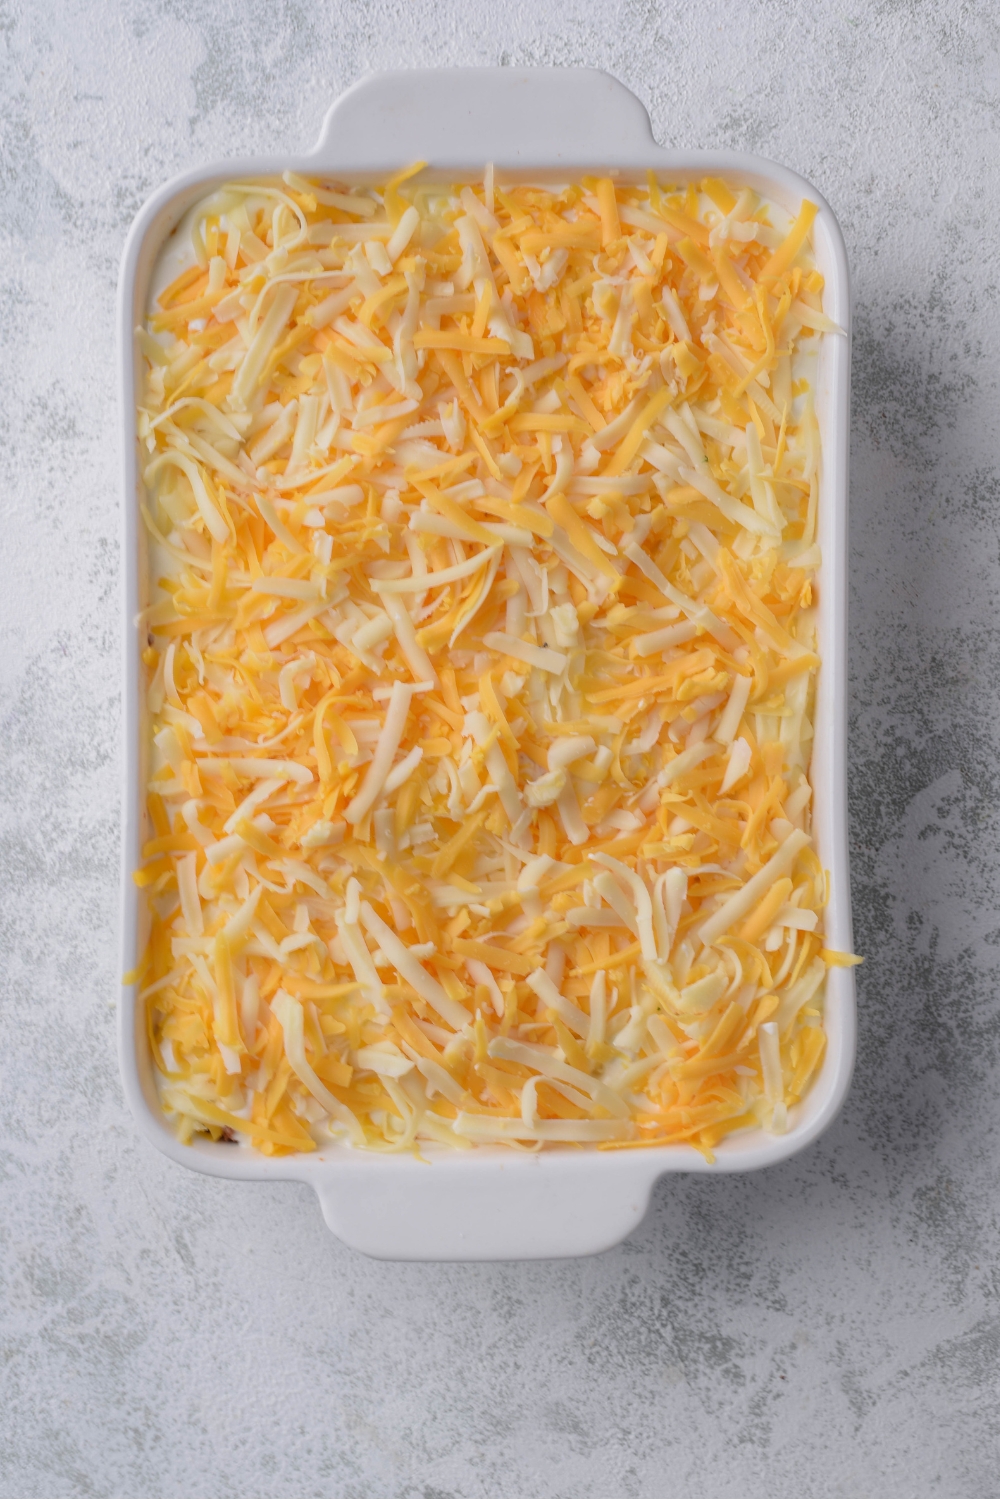 A white casserole dish with an unbaked casserole and shredded cheddar cheese sprinkled on top.